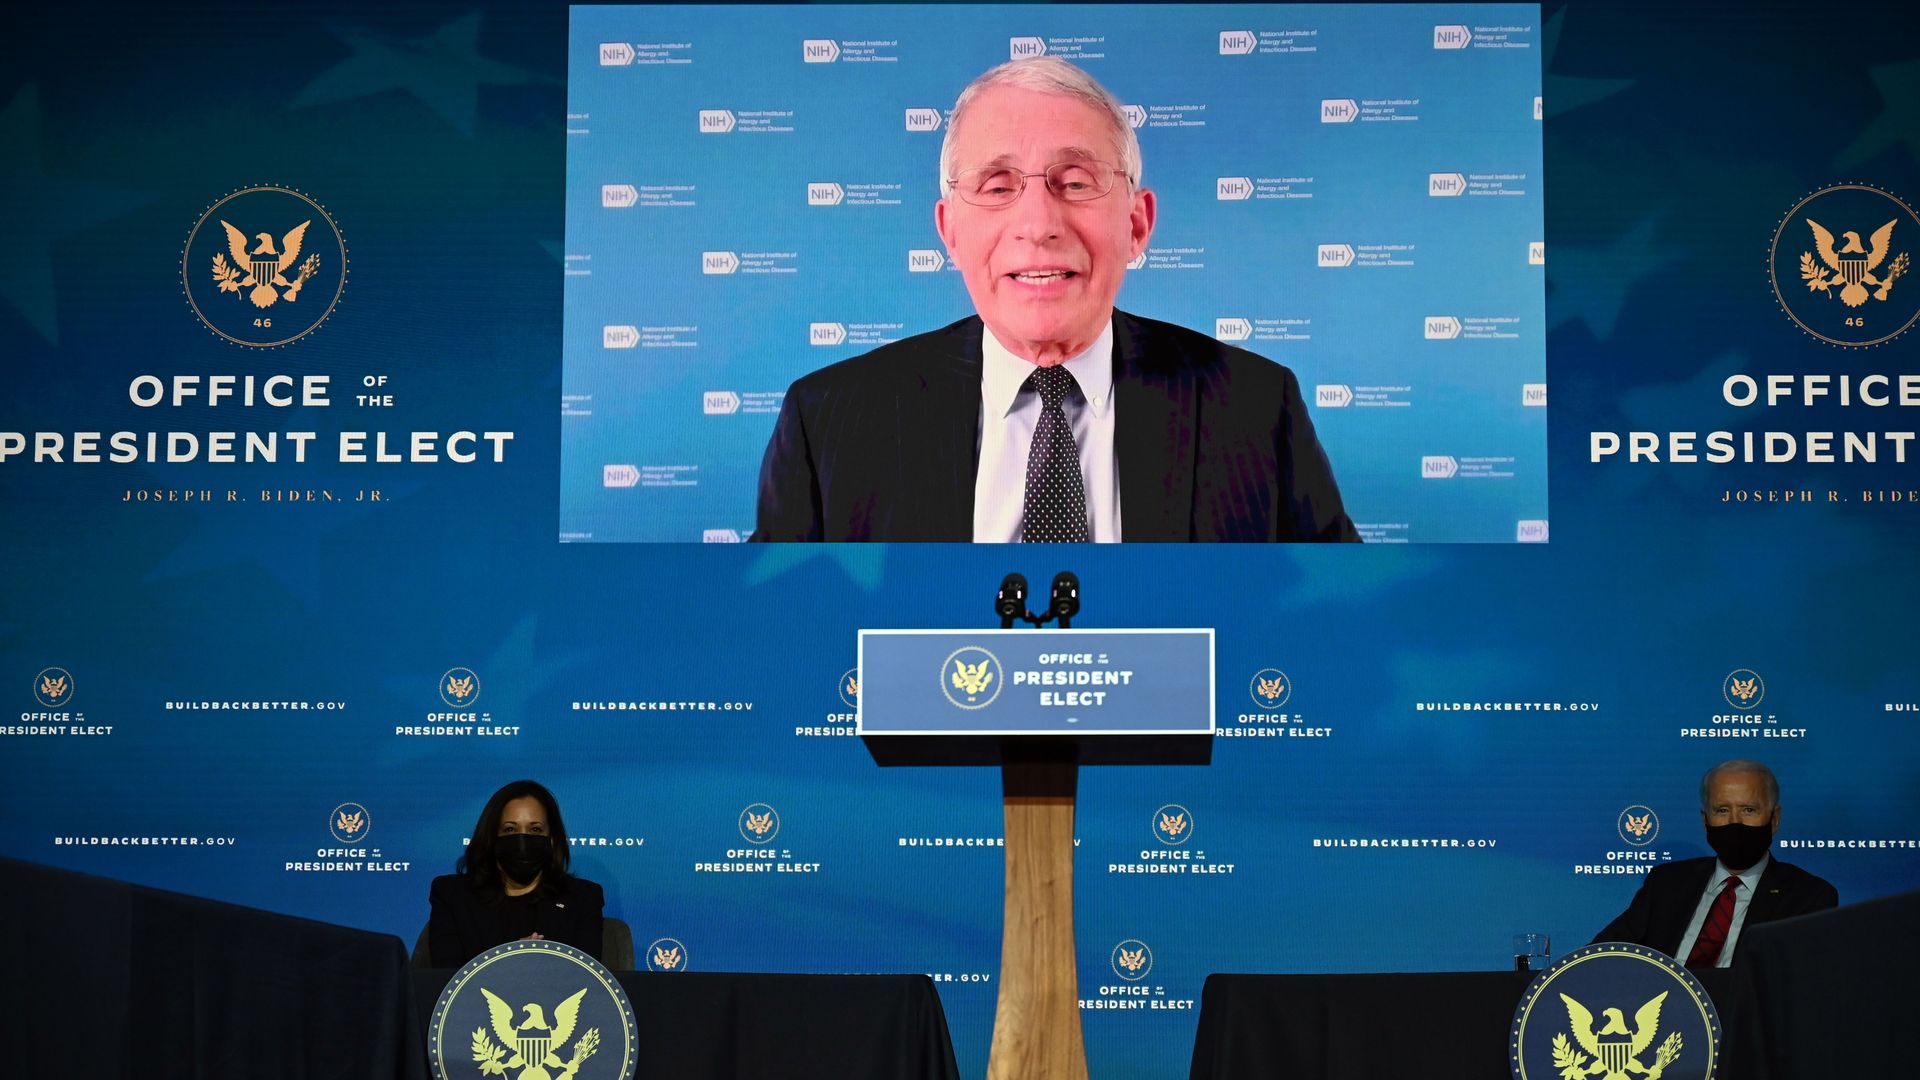 Anthony Fauci appears via video today with Harris and Biden. 